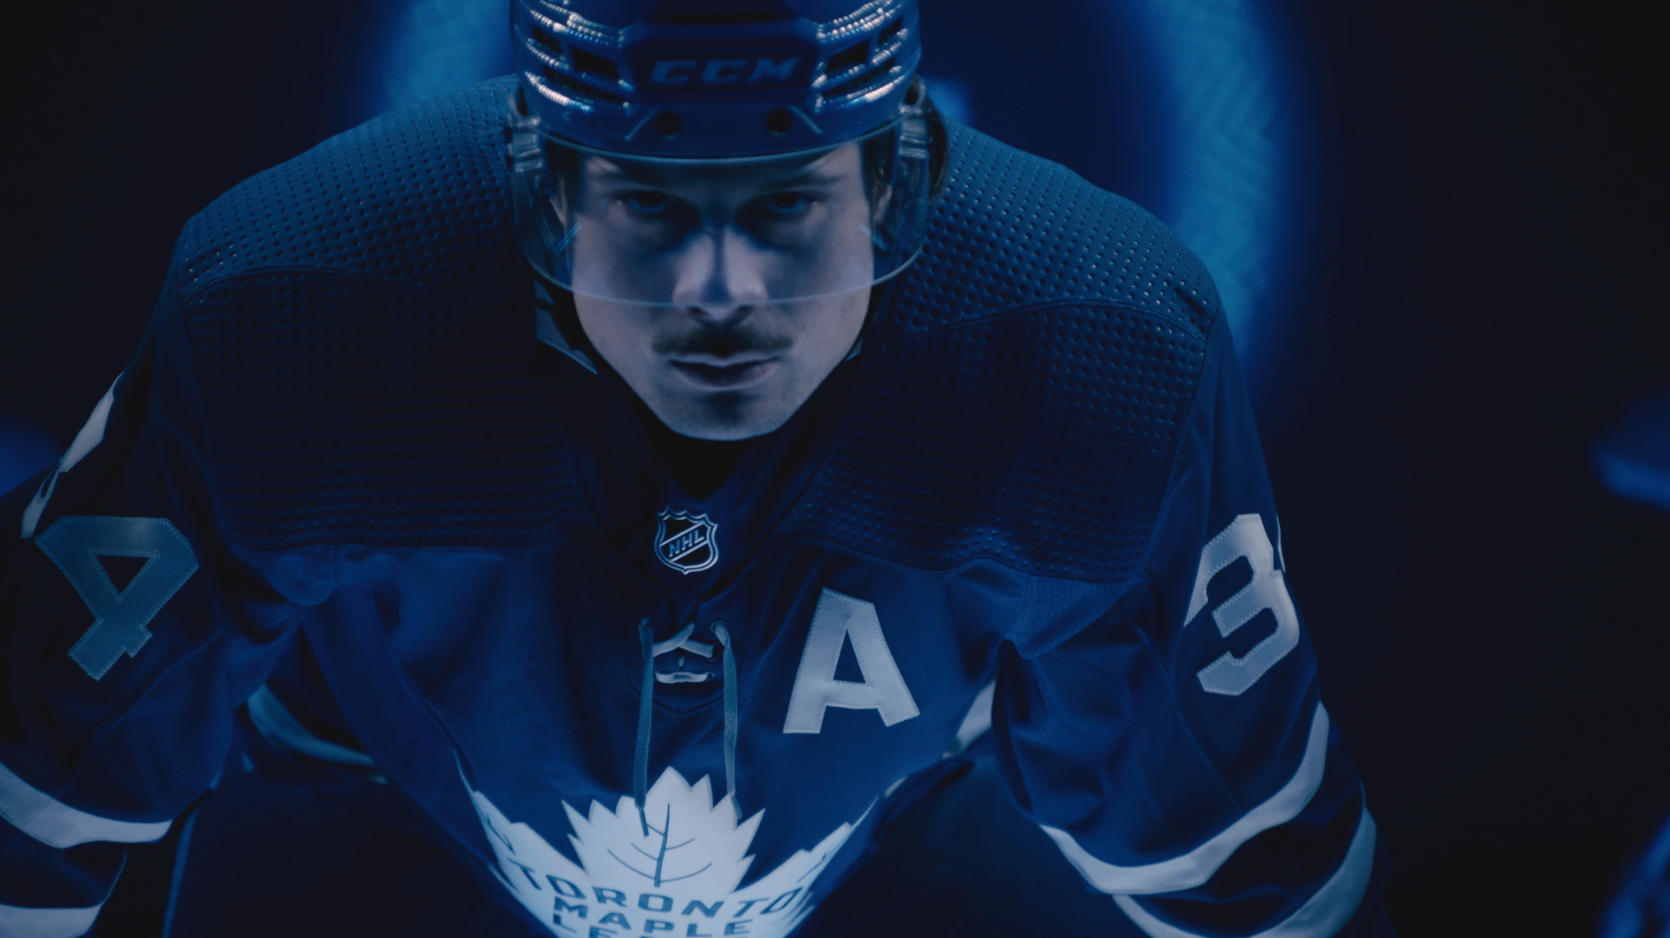 All About The Canadian Amazon Original Series, All or Nothing Toronto Maple Leafs -